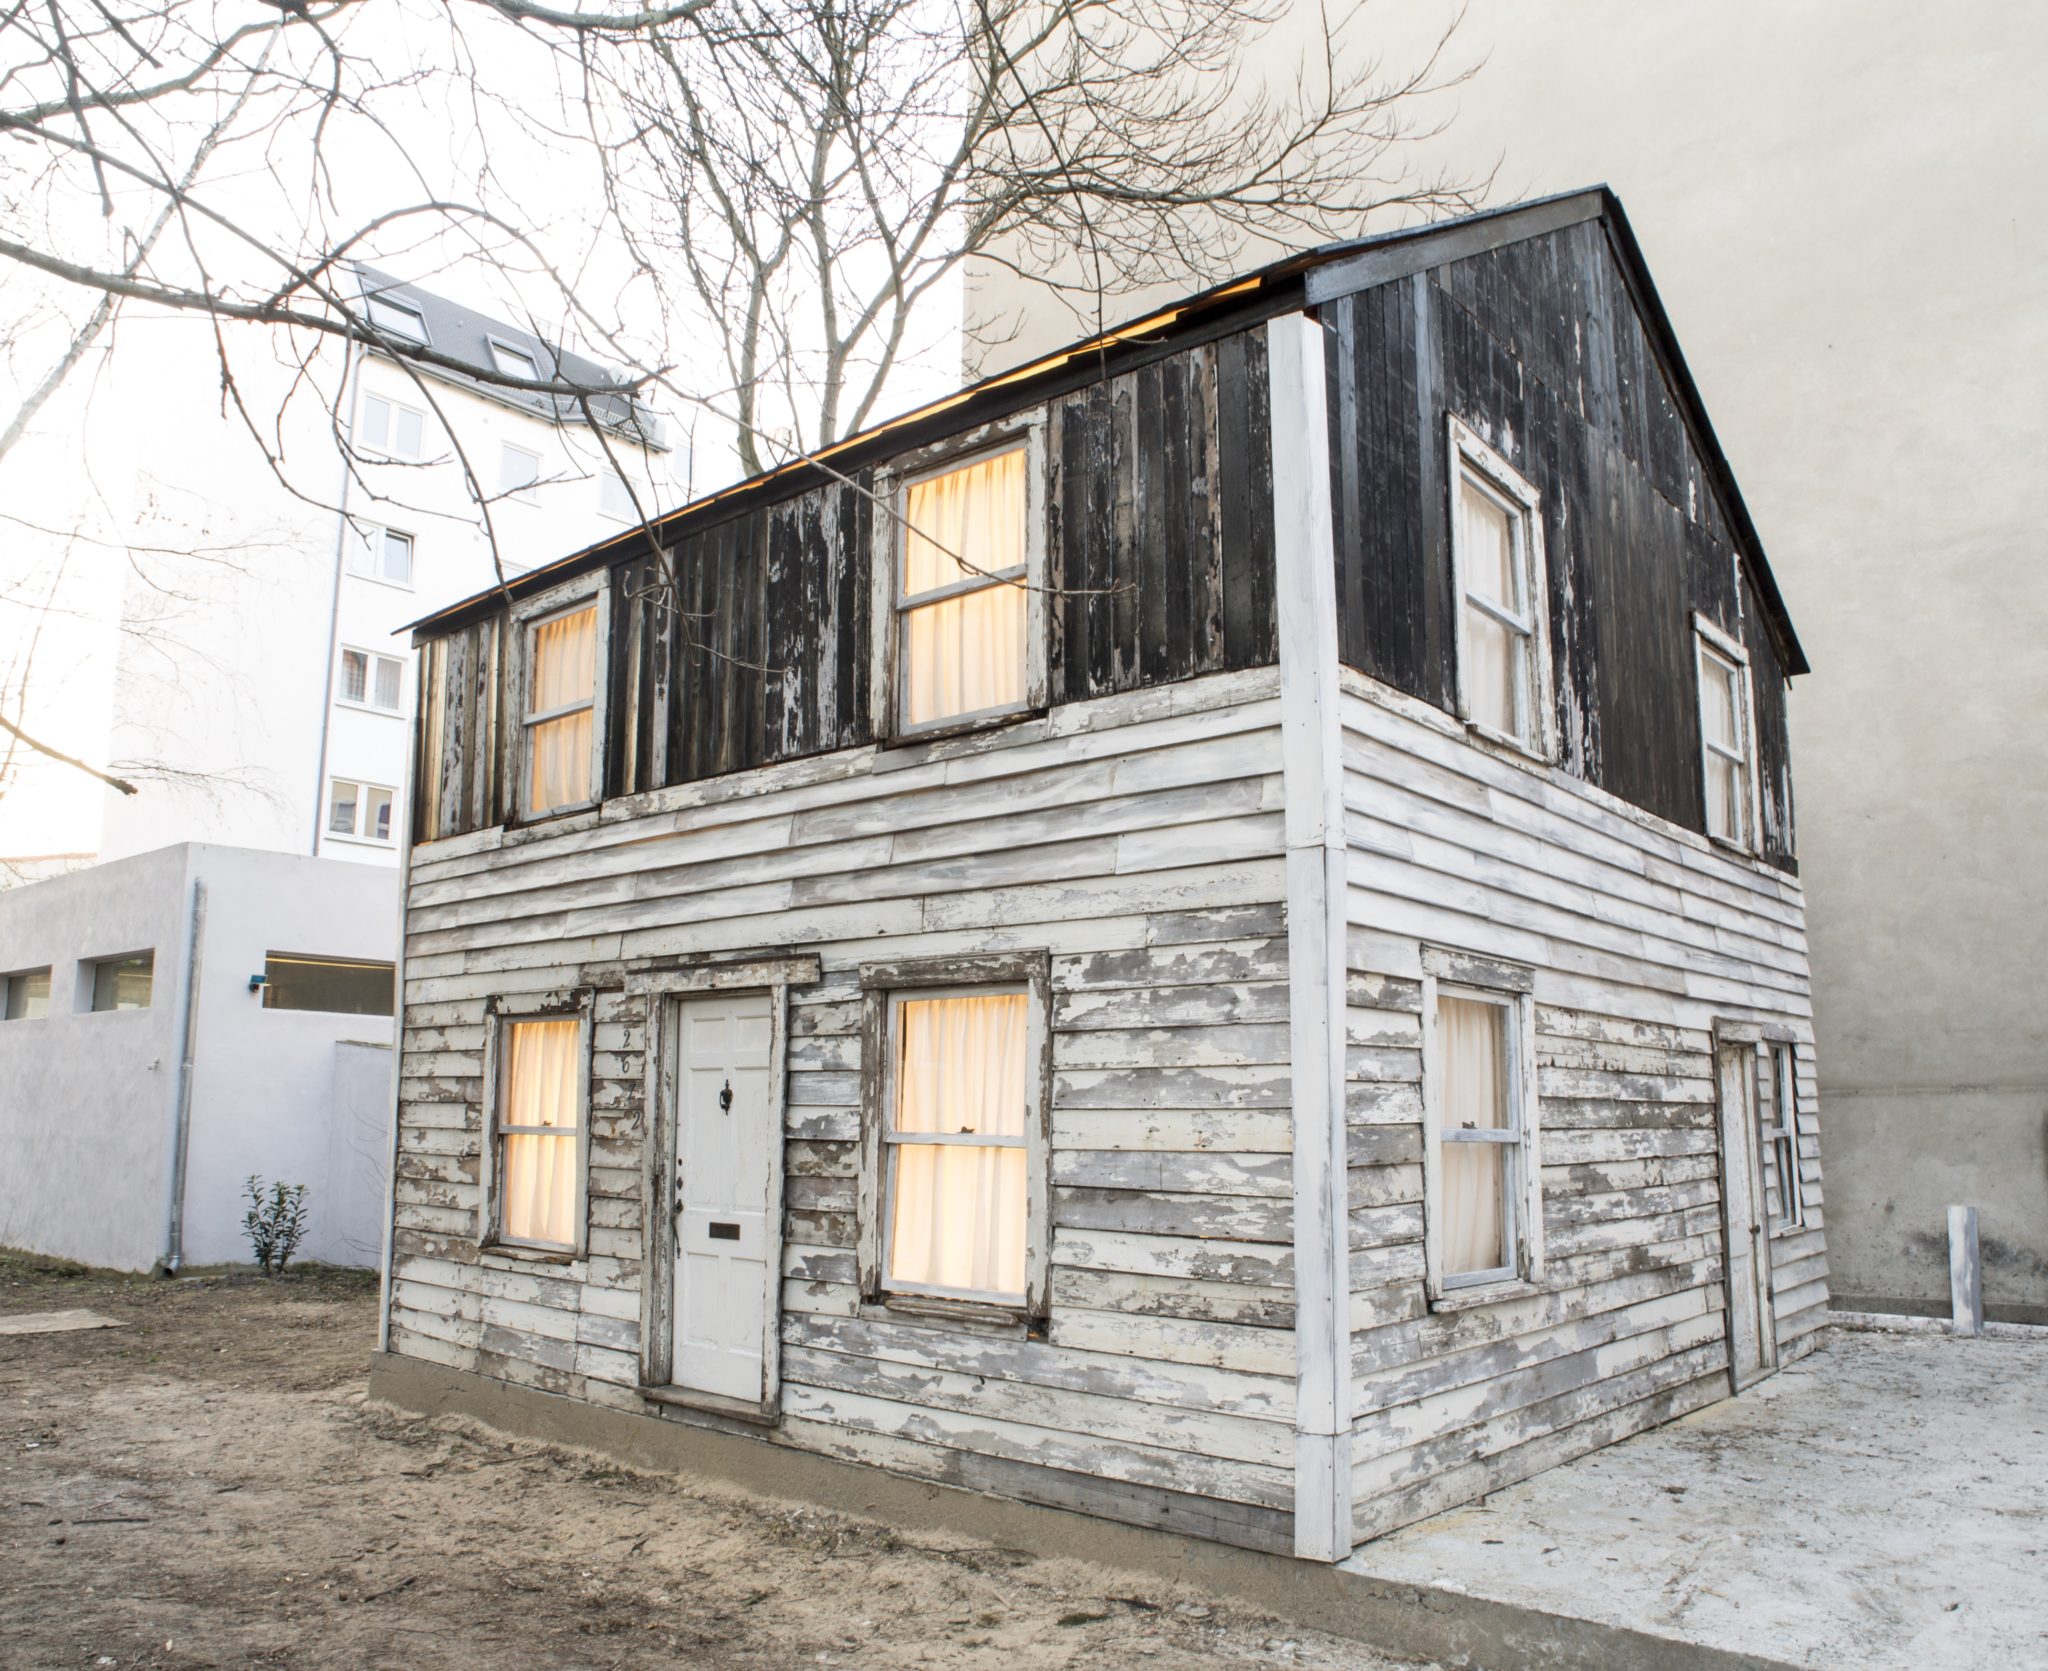 THE ROSA PARKS HOUSE was moved to Berlin from Detroit, but will be coming to Providence early next year as an installation. / COURTESY FABIA MENDOZA